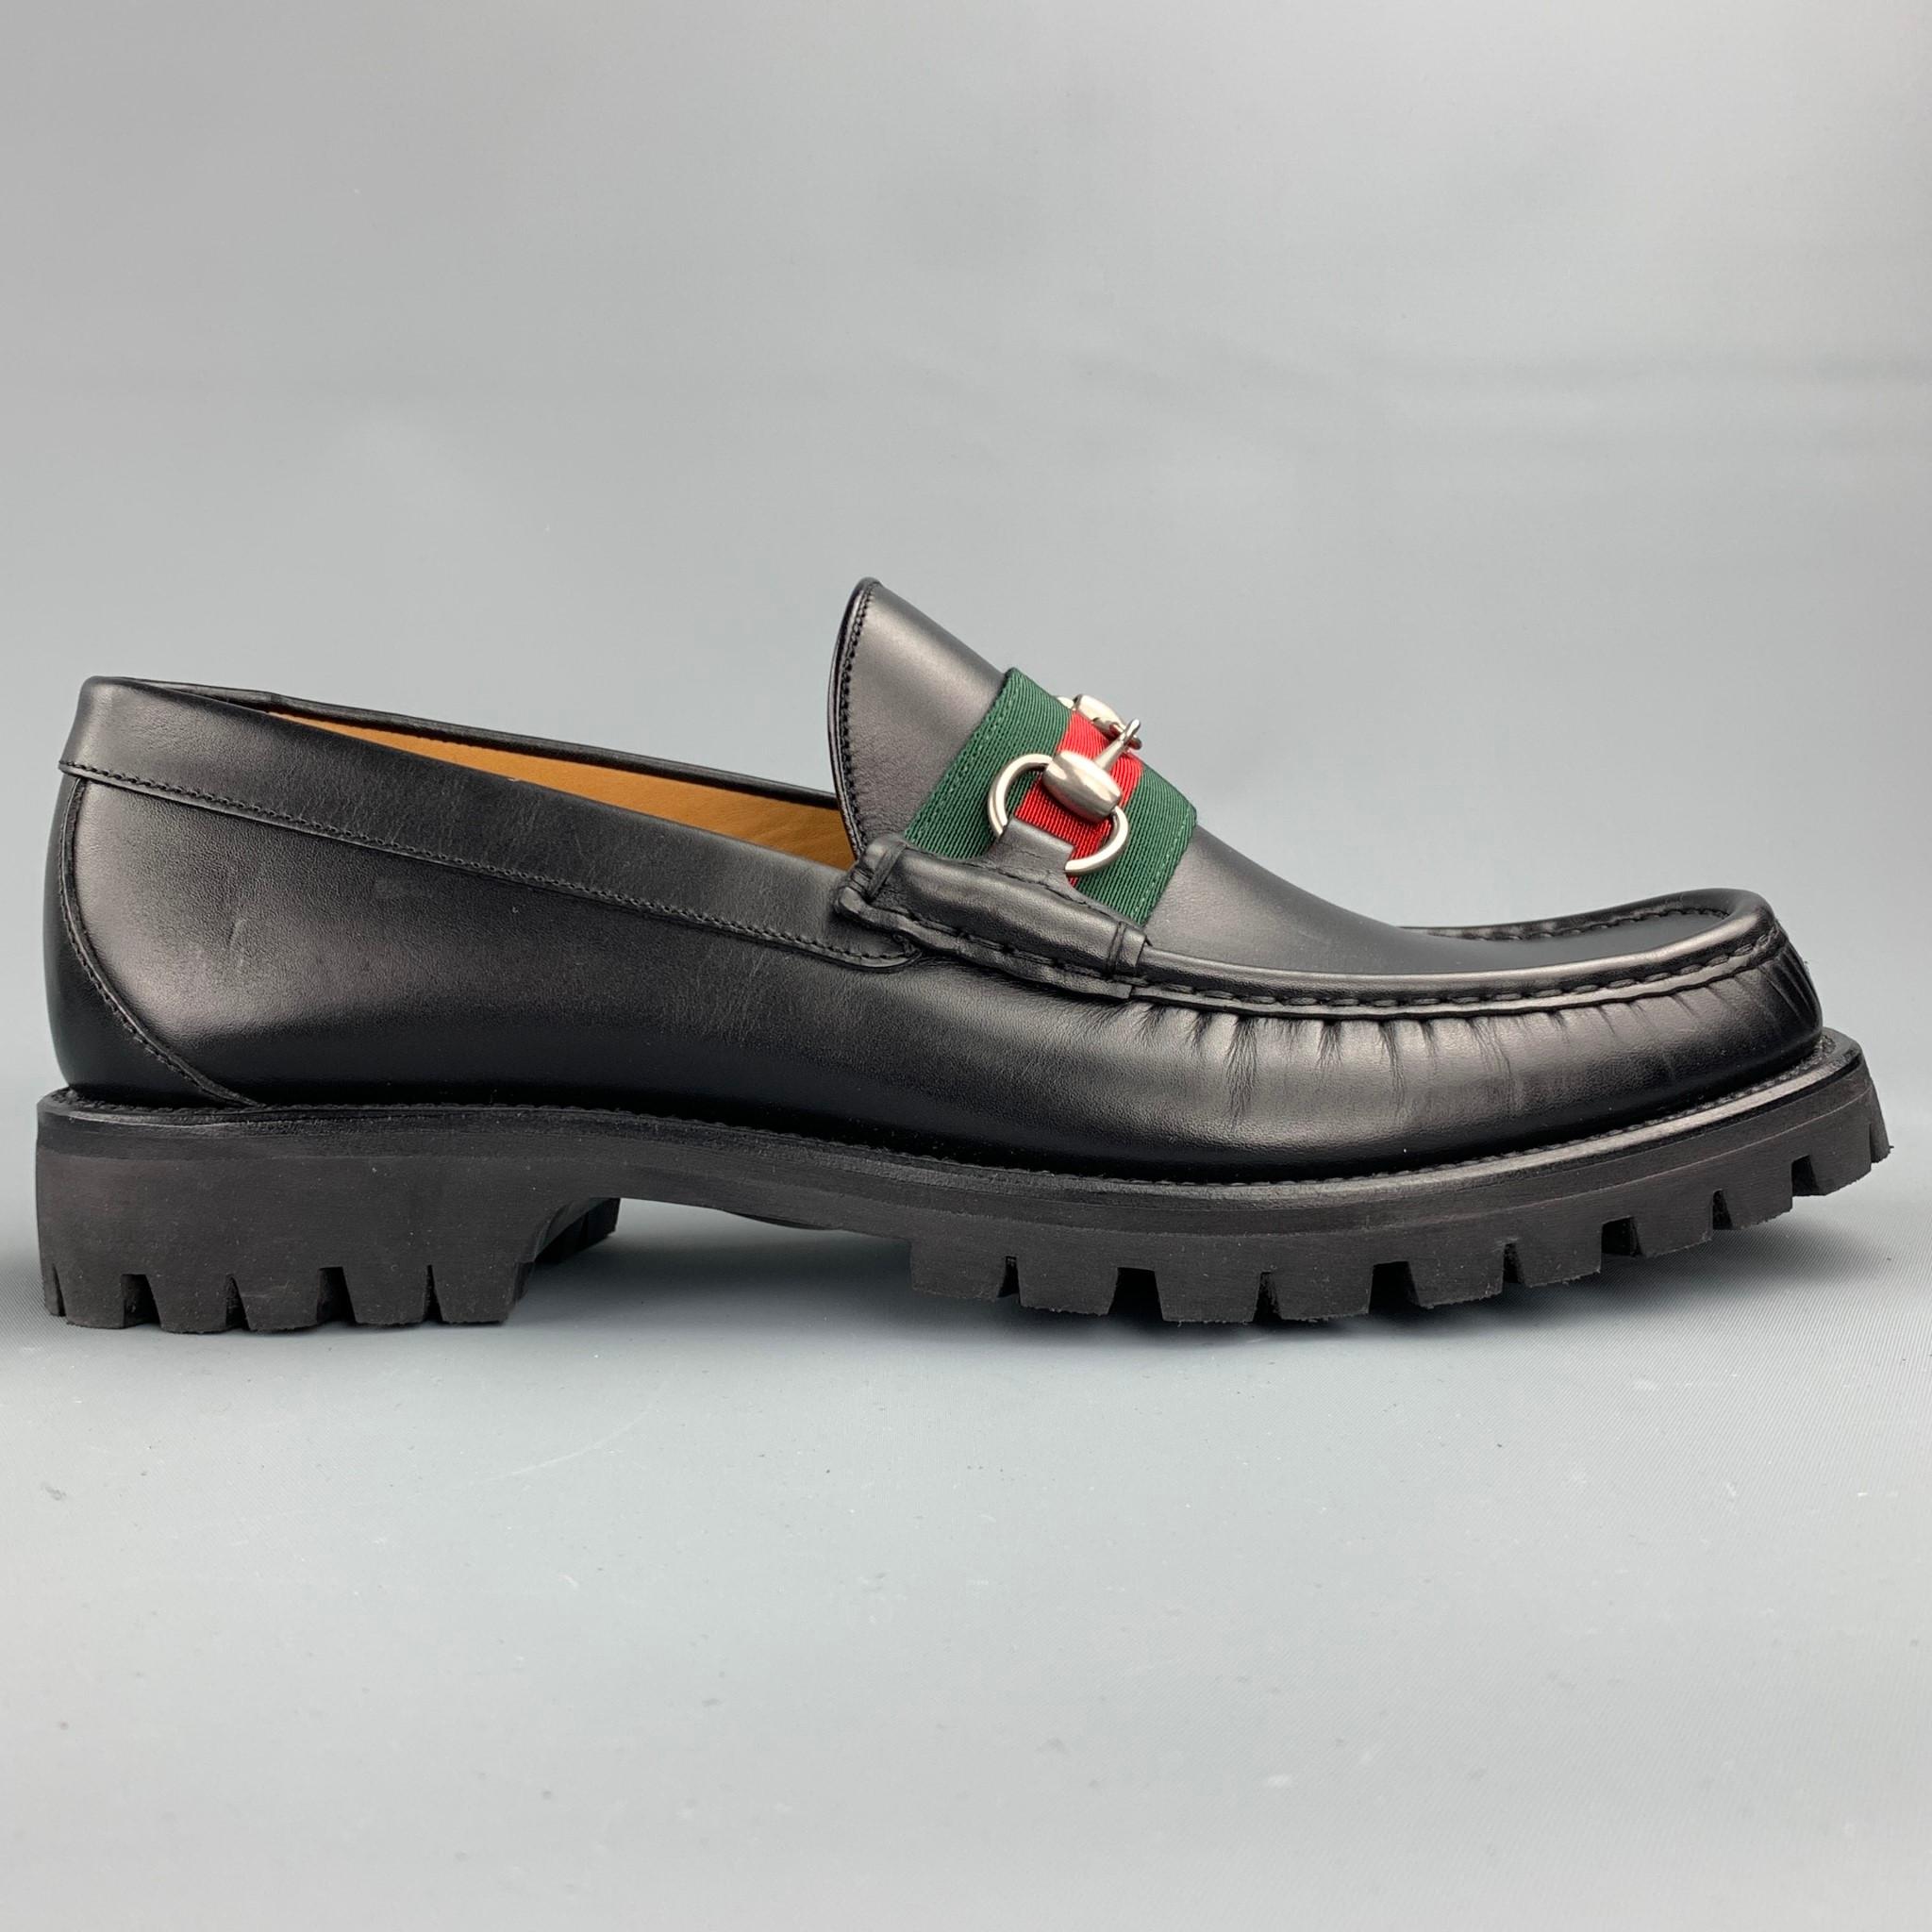 GUCCI loafers comes in a black leather wit a stripe trim featuring a web horsebit design and a lug rubber sole. Minor wear. Made in Italy.

Very Good Pre-Owned Condition.
Marked: 496246 10 14A

Outsole:

12 in. x 4 in. 